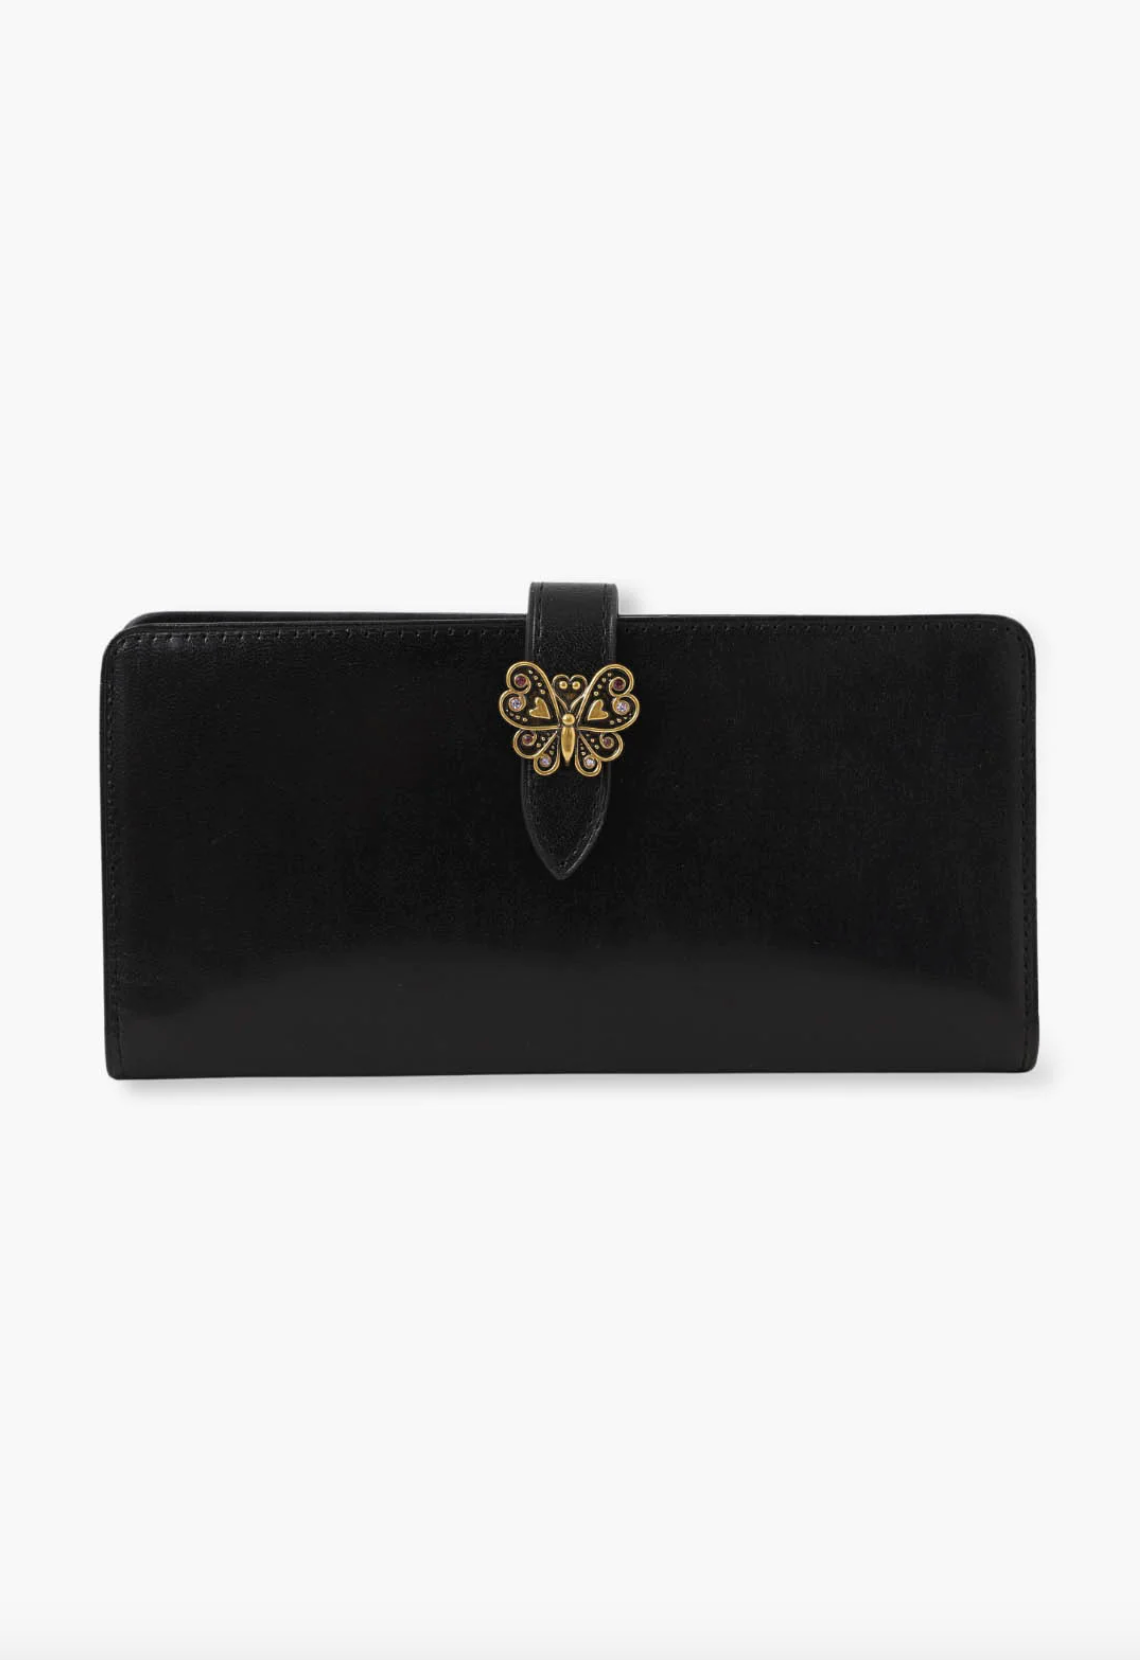 Roger Wallet matte leather finishes, signature Anna Sui butterfly hardware on flap of the wallet